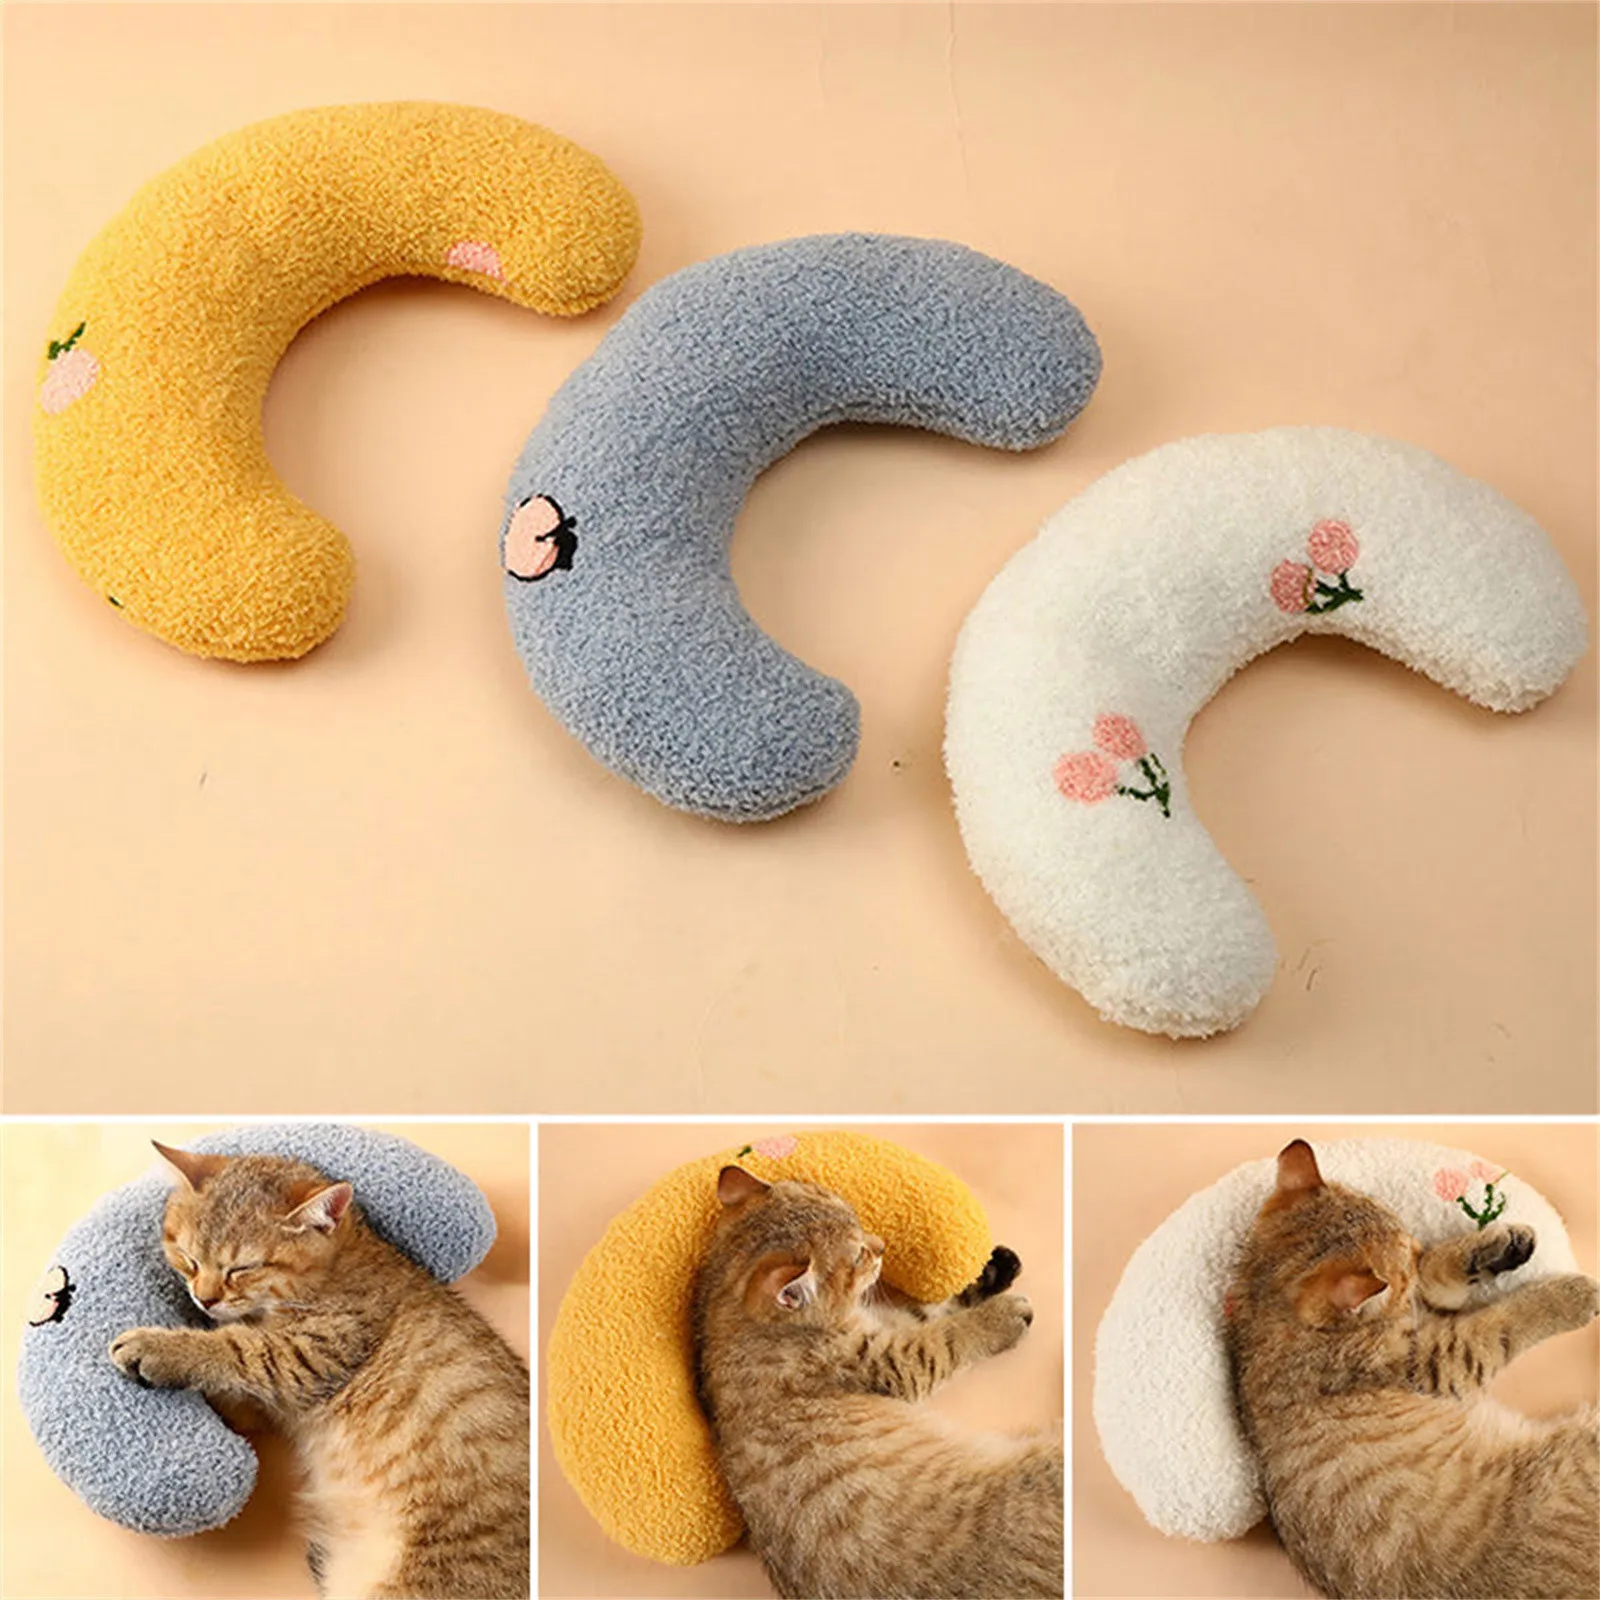 

U-Shaped Little Pillow For Cats Ultra Soft Pet Calming Toy Half Donut Cuddler Cat Cute Cozy Sleeping Pillow Machine Washable